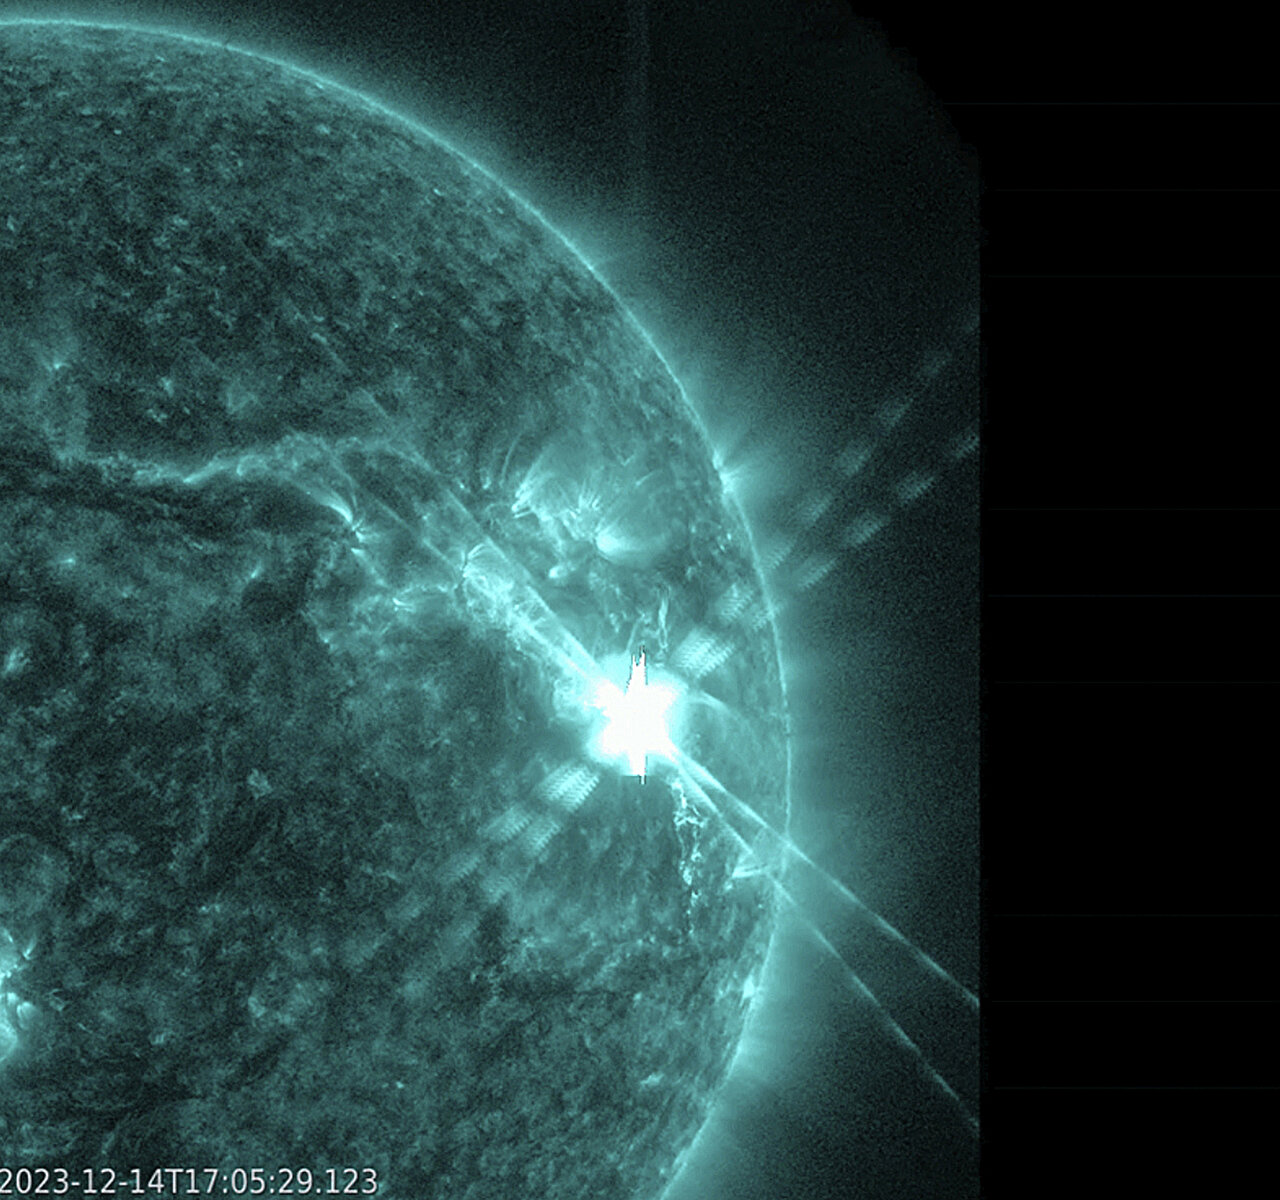 Largest Solar Flare in Years Causes Temporary Radio Signal Disruptions on Earth